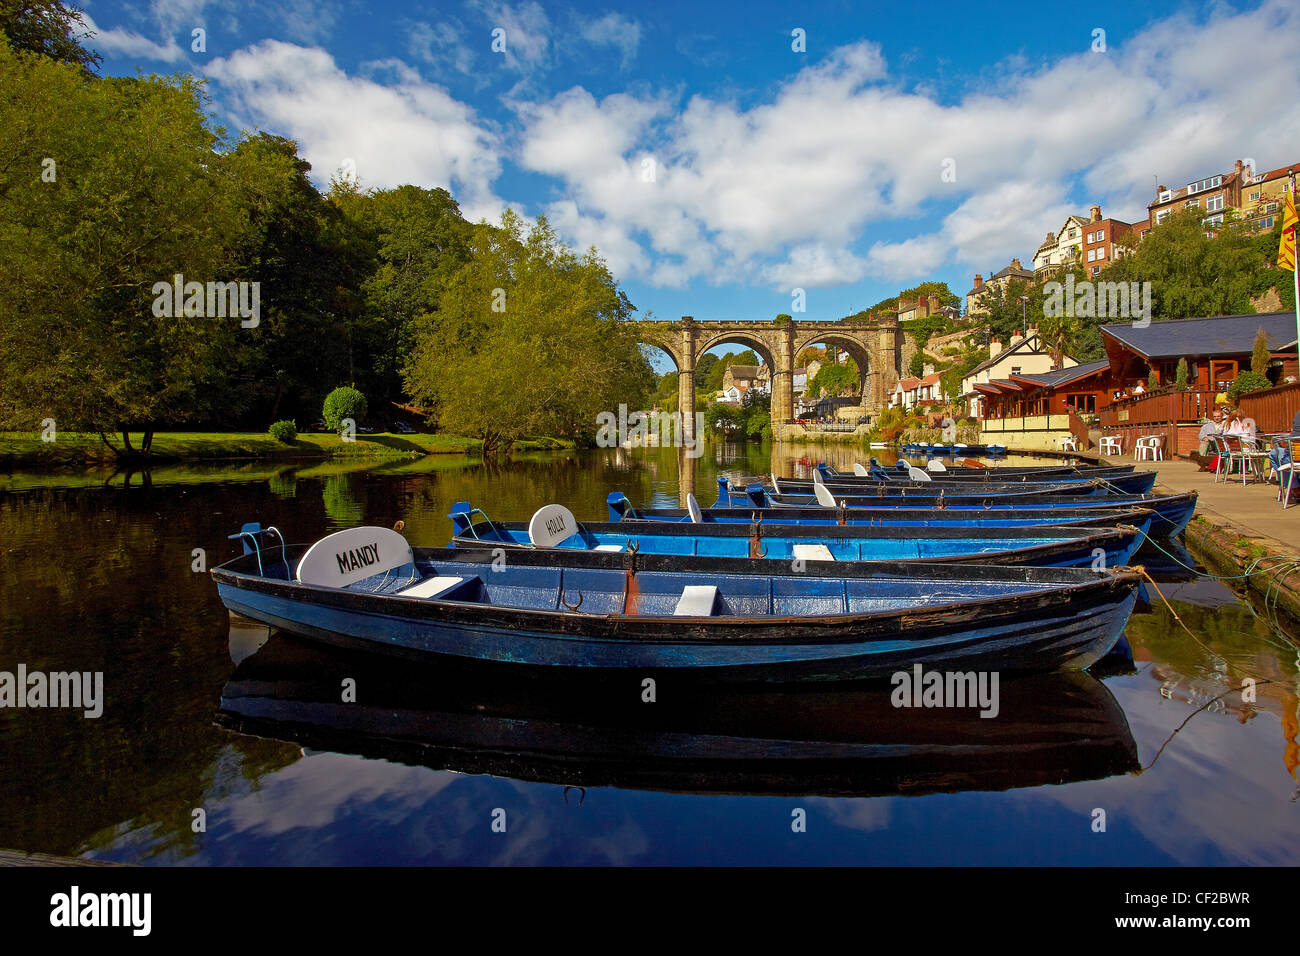 Rowing boats for hire on the River Nidd at Knaresborough. Stock Photo